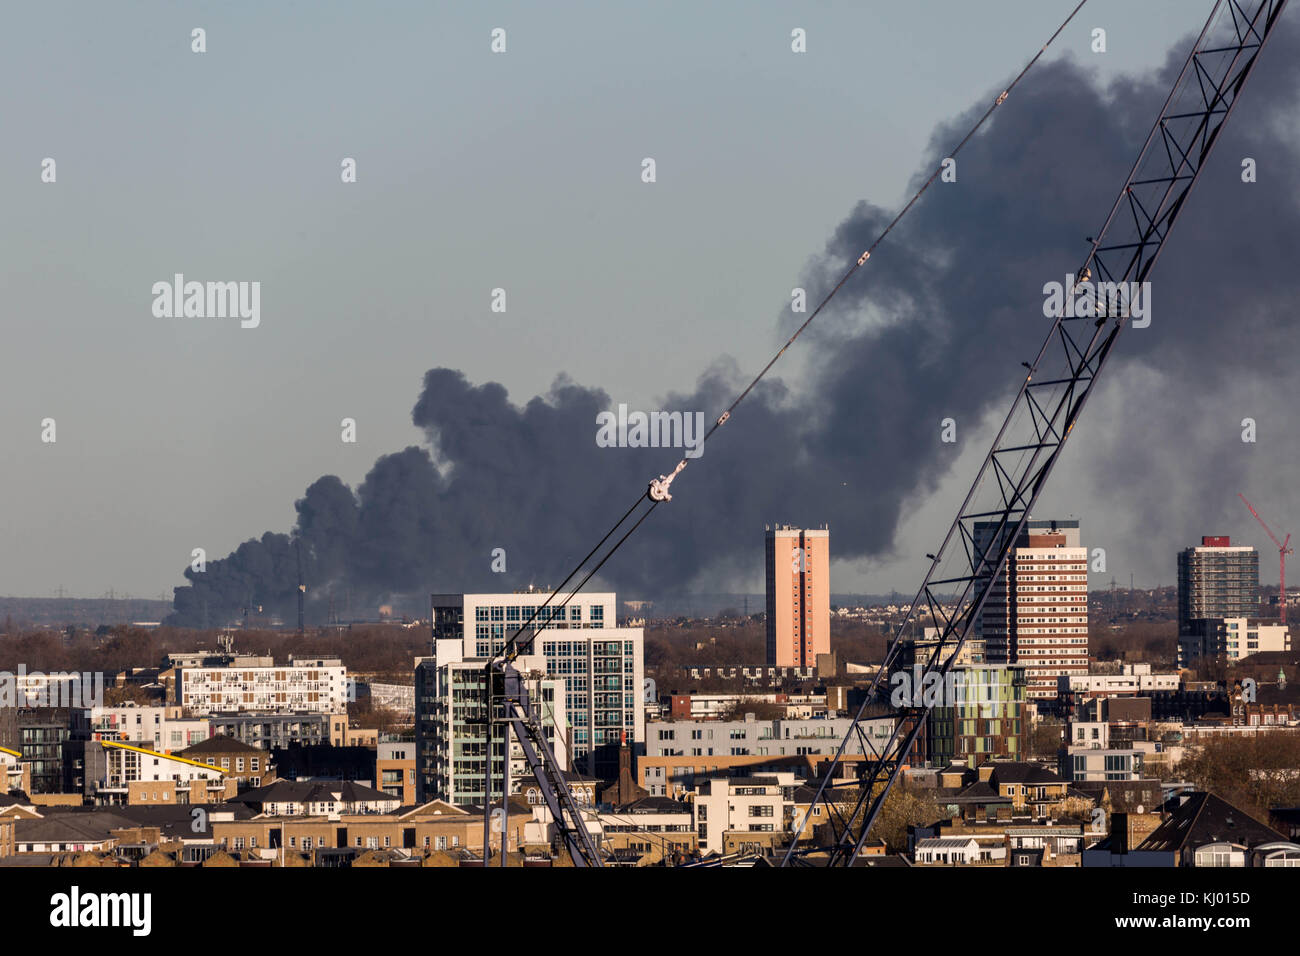 London, UK. 23th Nov, 2017. Black smoke rises from a warehouse fire in Ponders End, Enfield. Seen from south east London. Currently 12 fire engines and 81 firefighters are tackling the blaze. Credit: Guy Corbishley/Alamy Live News Stock Photo